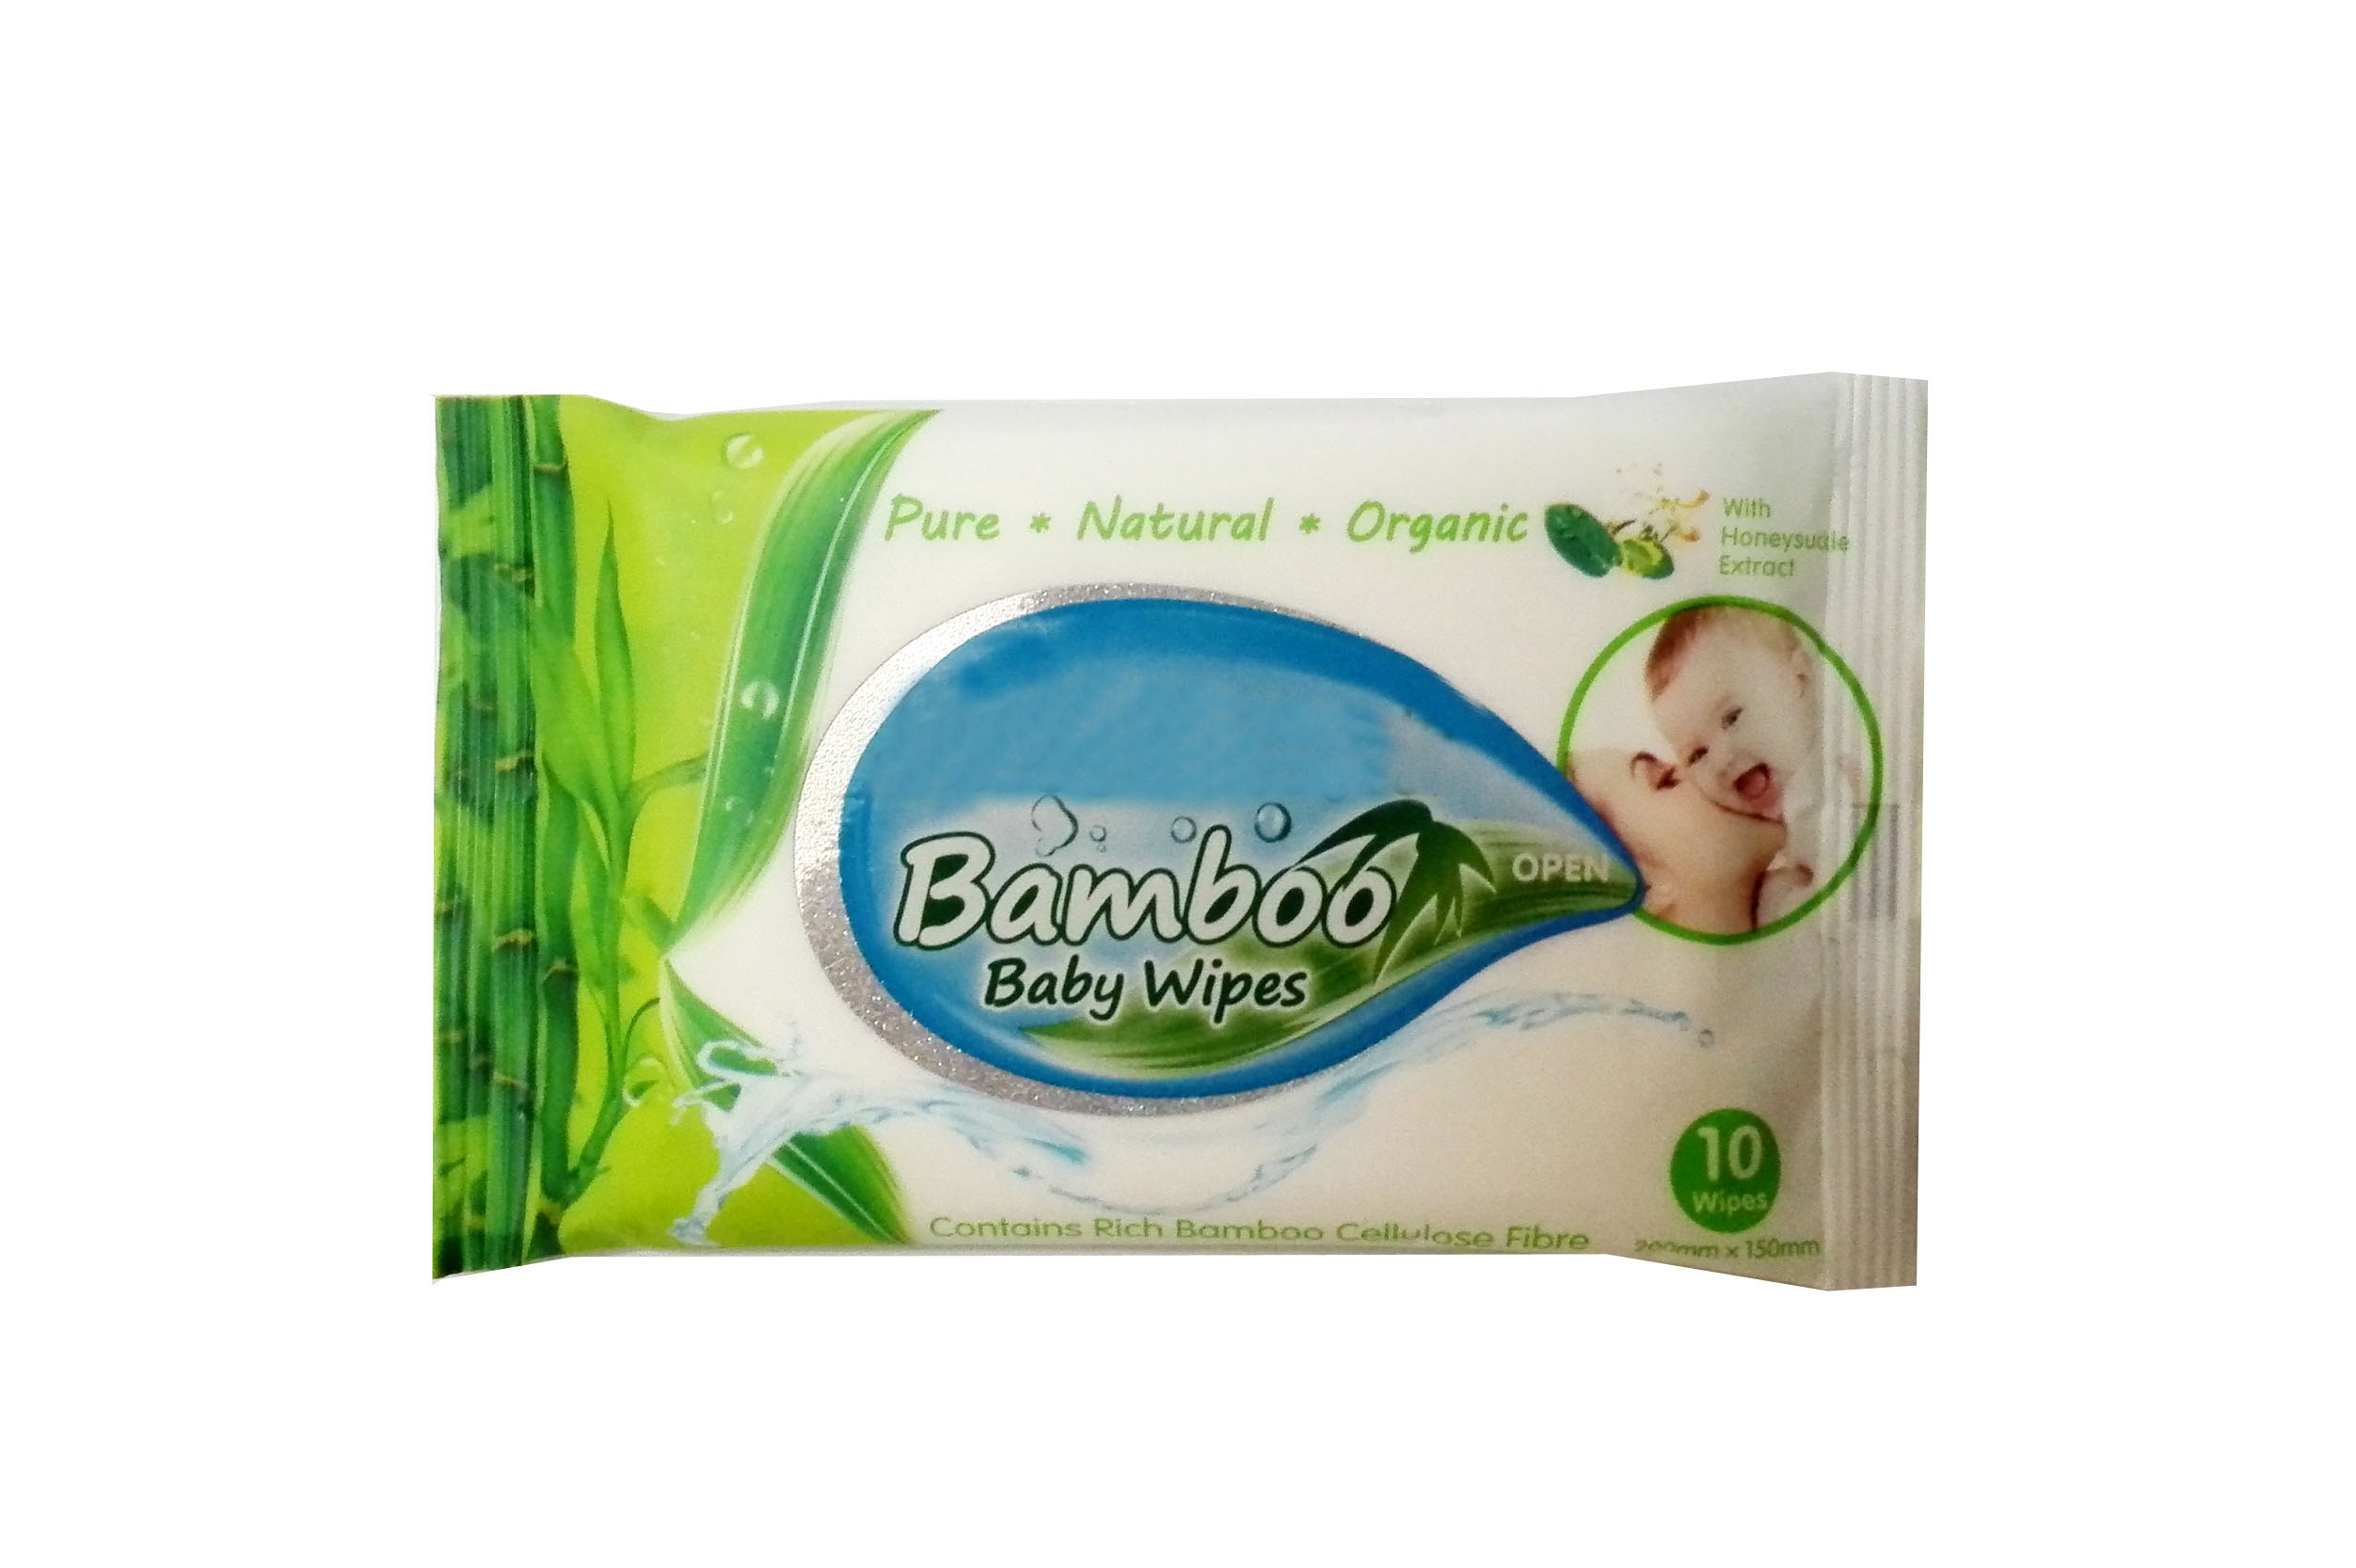 Bamboo baby wipes of 10pcs